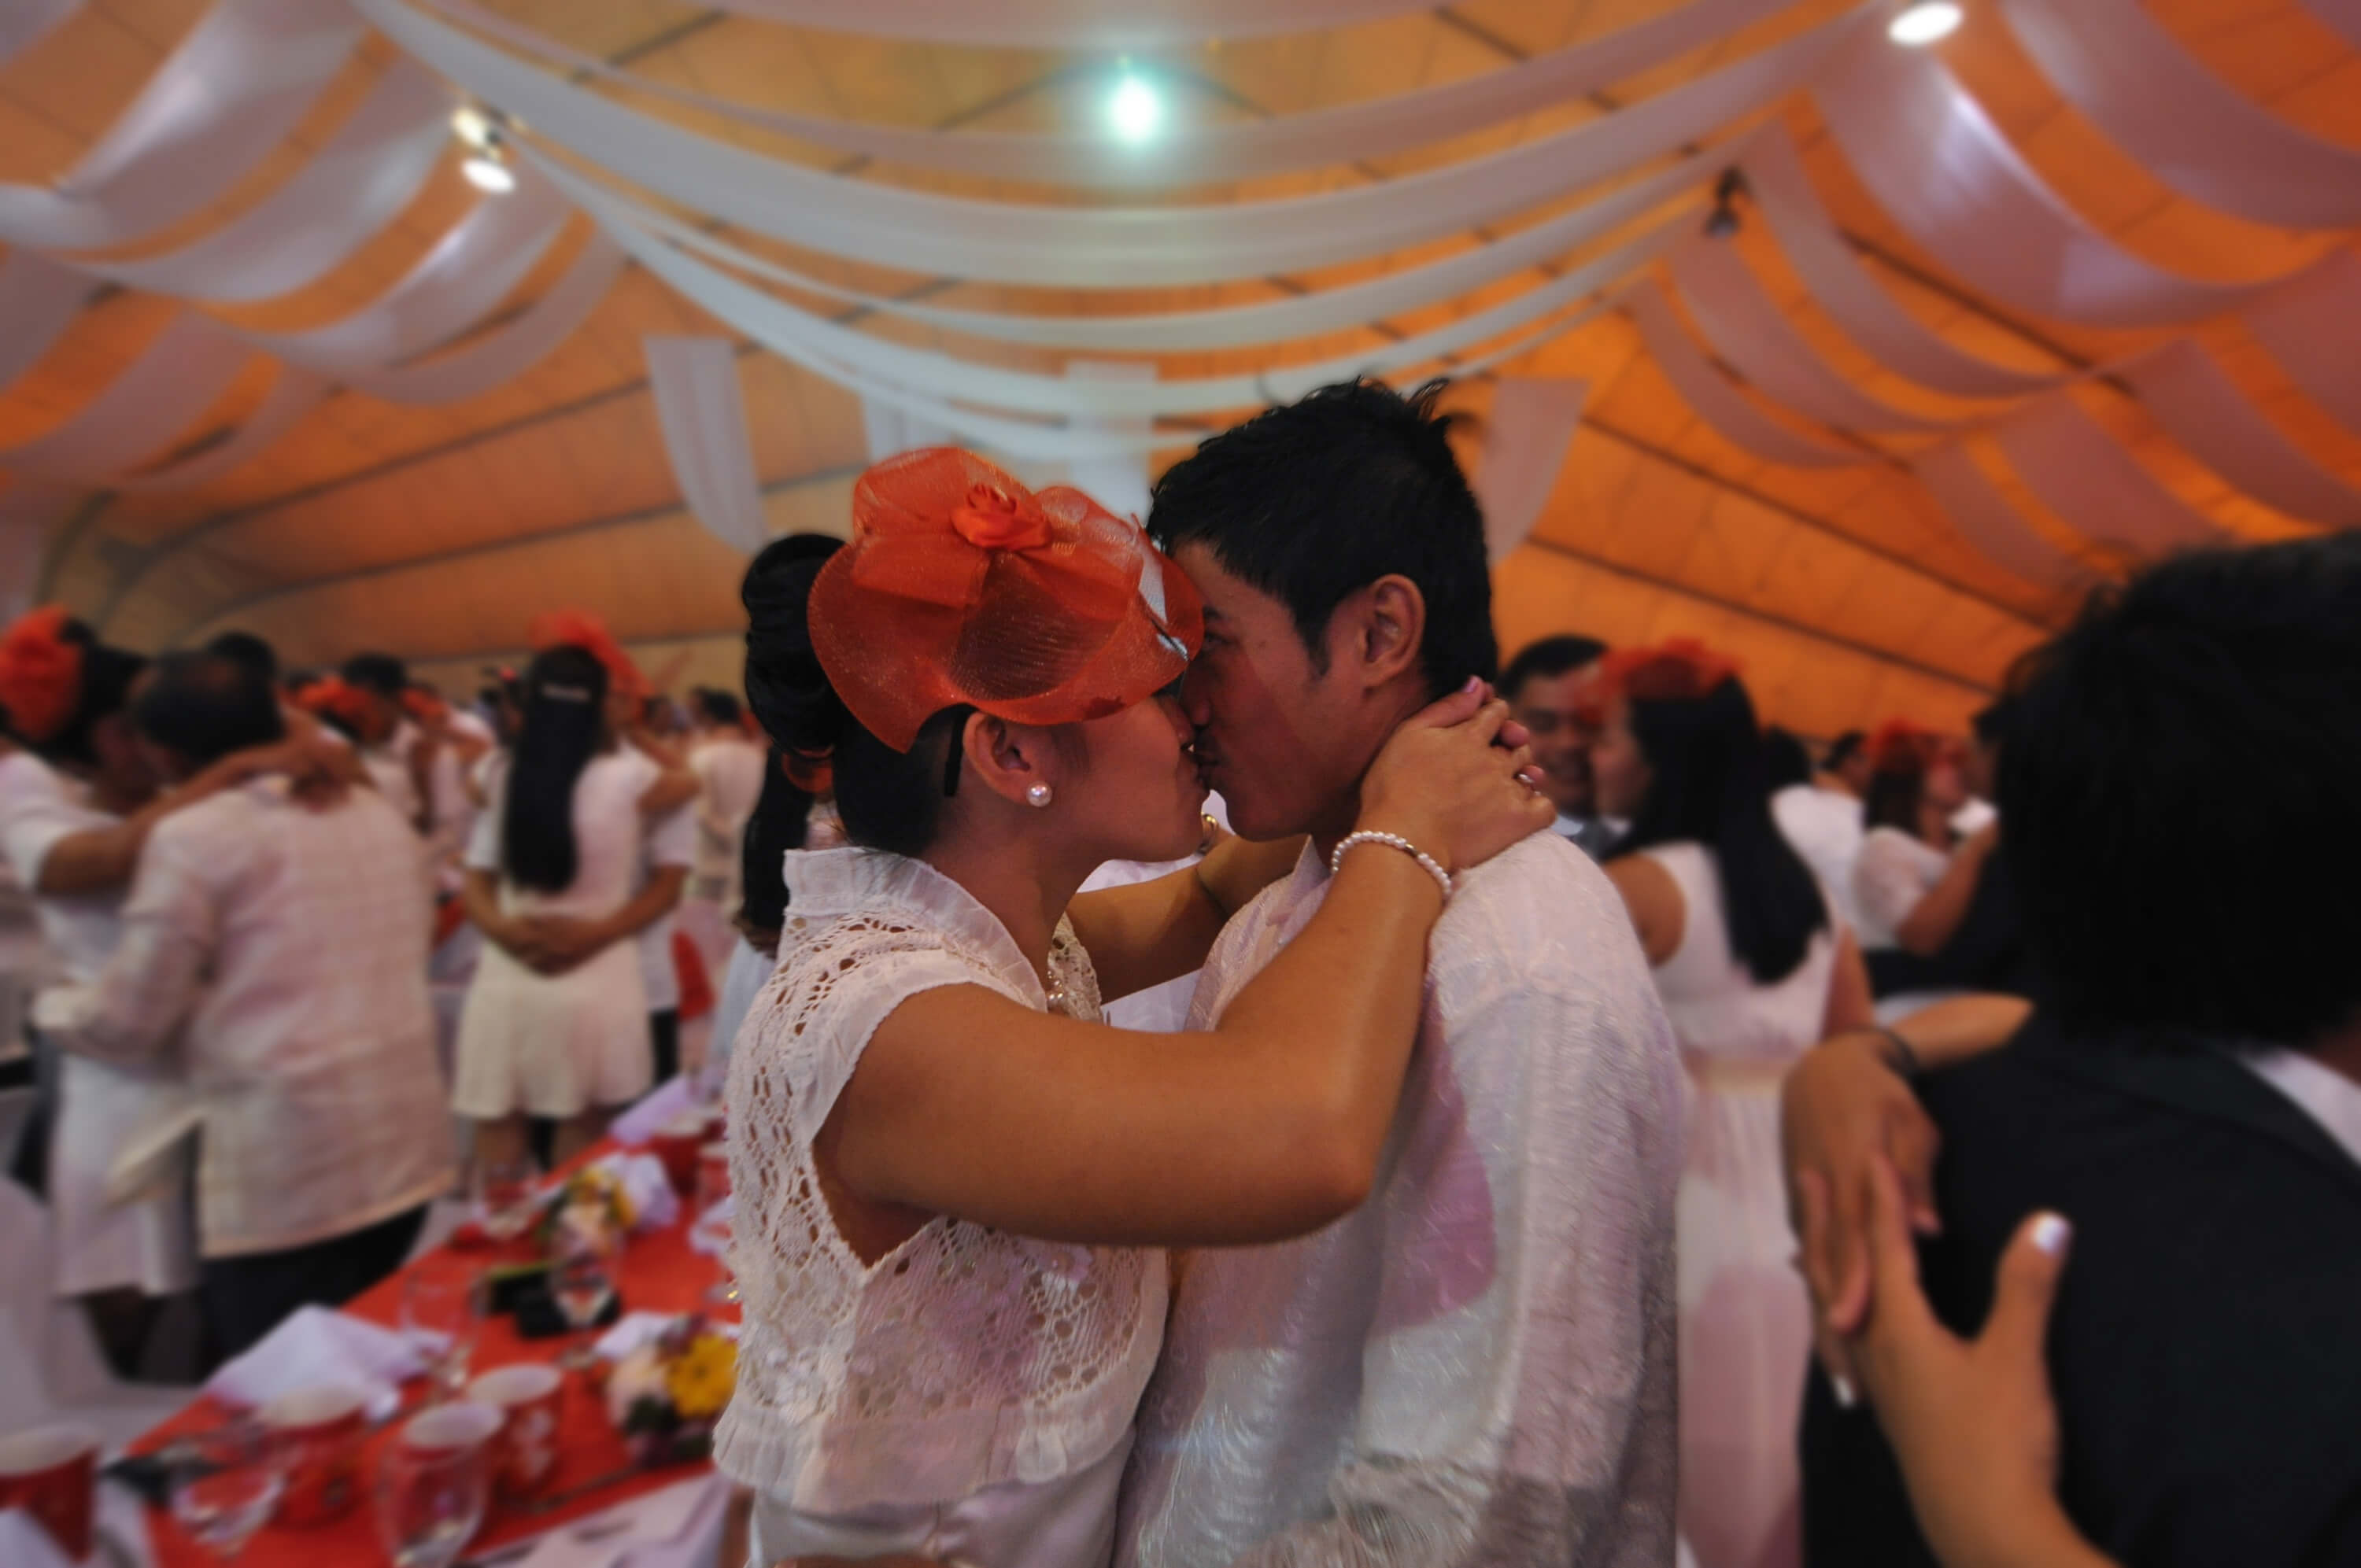 couples getting married in Philippines on valentines day 